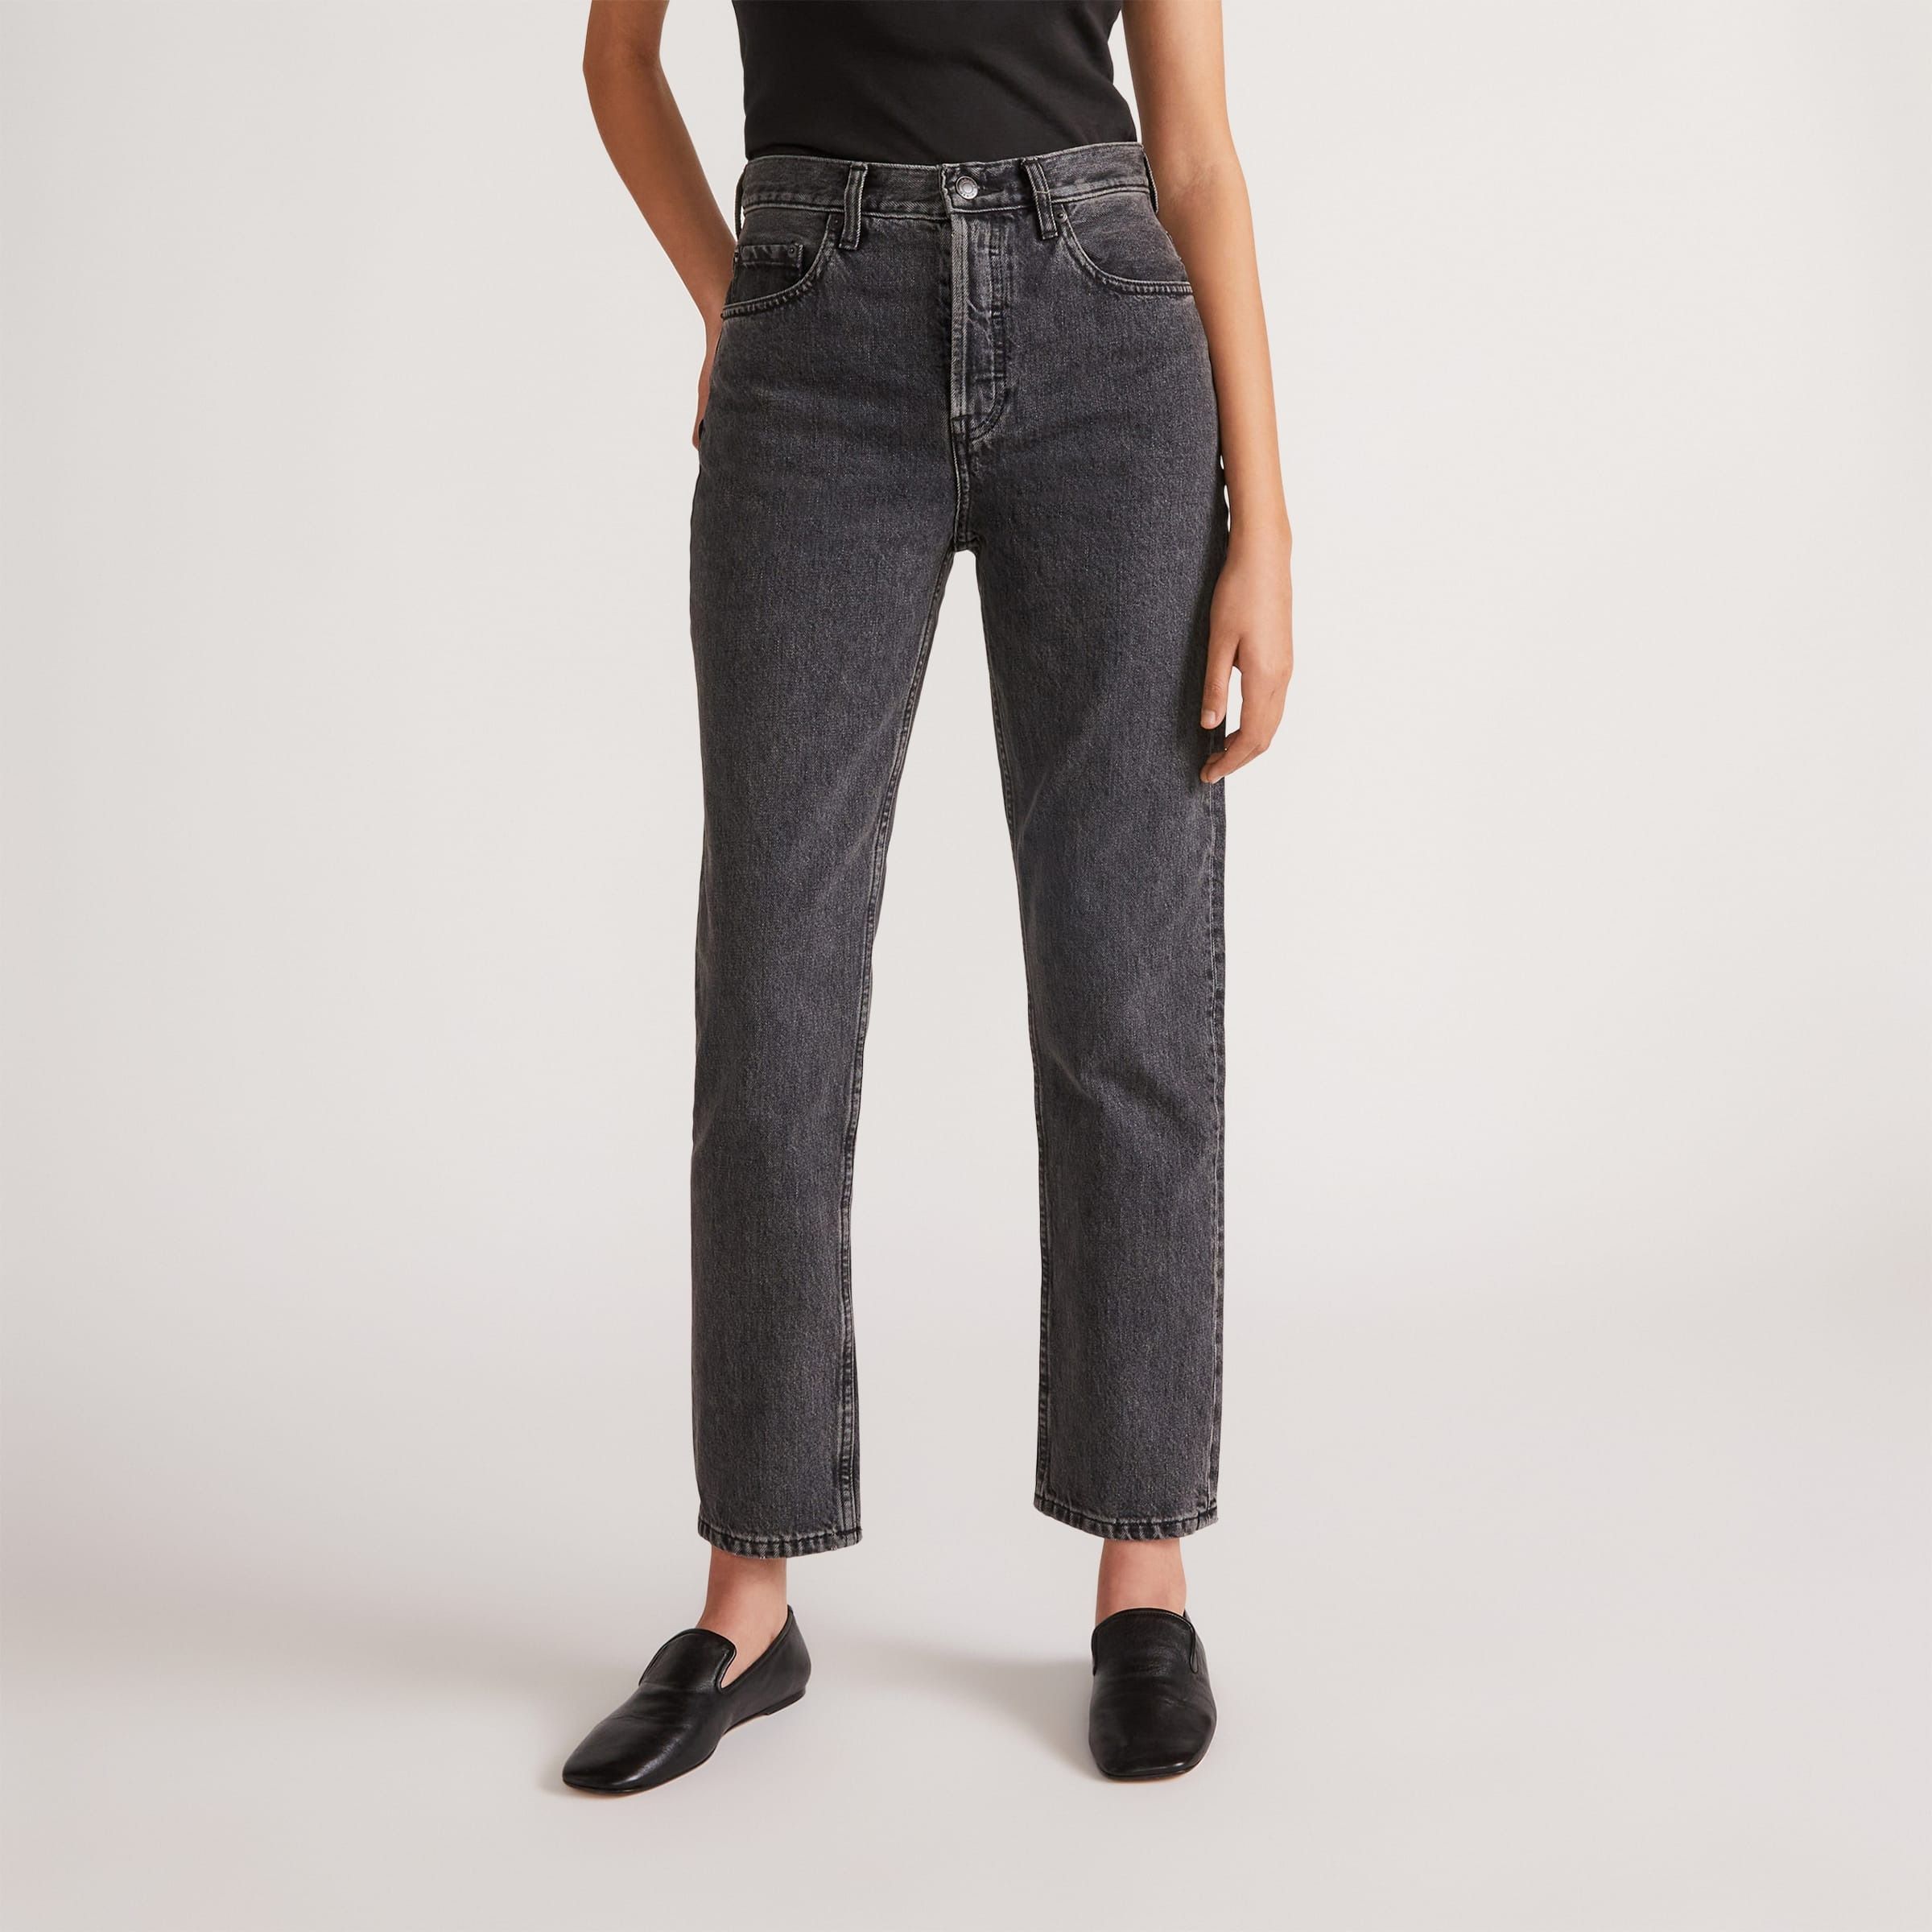 DÔEN Fall Floral Top Review with Everlane Straight Leg Pants - Jeans and a  Teacup